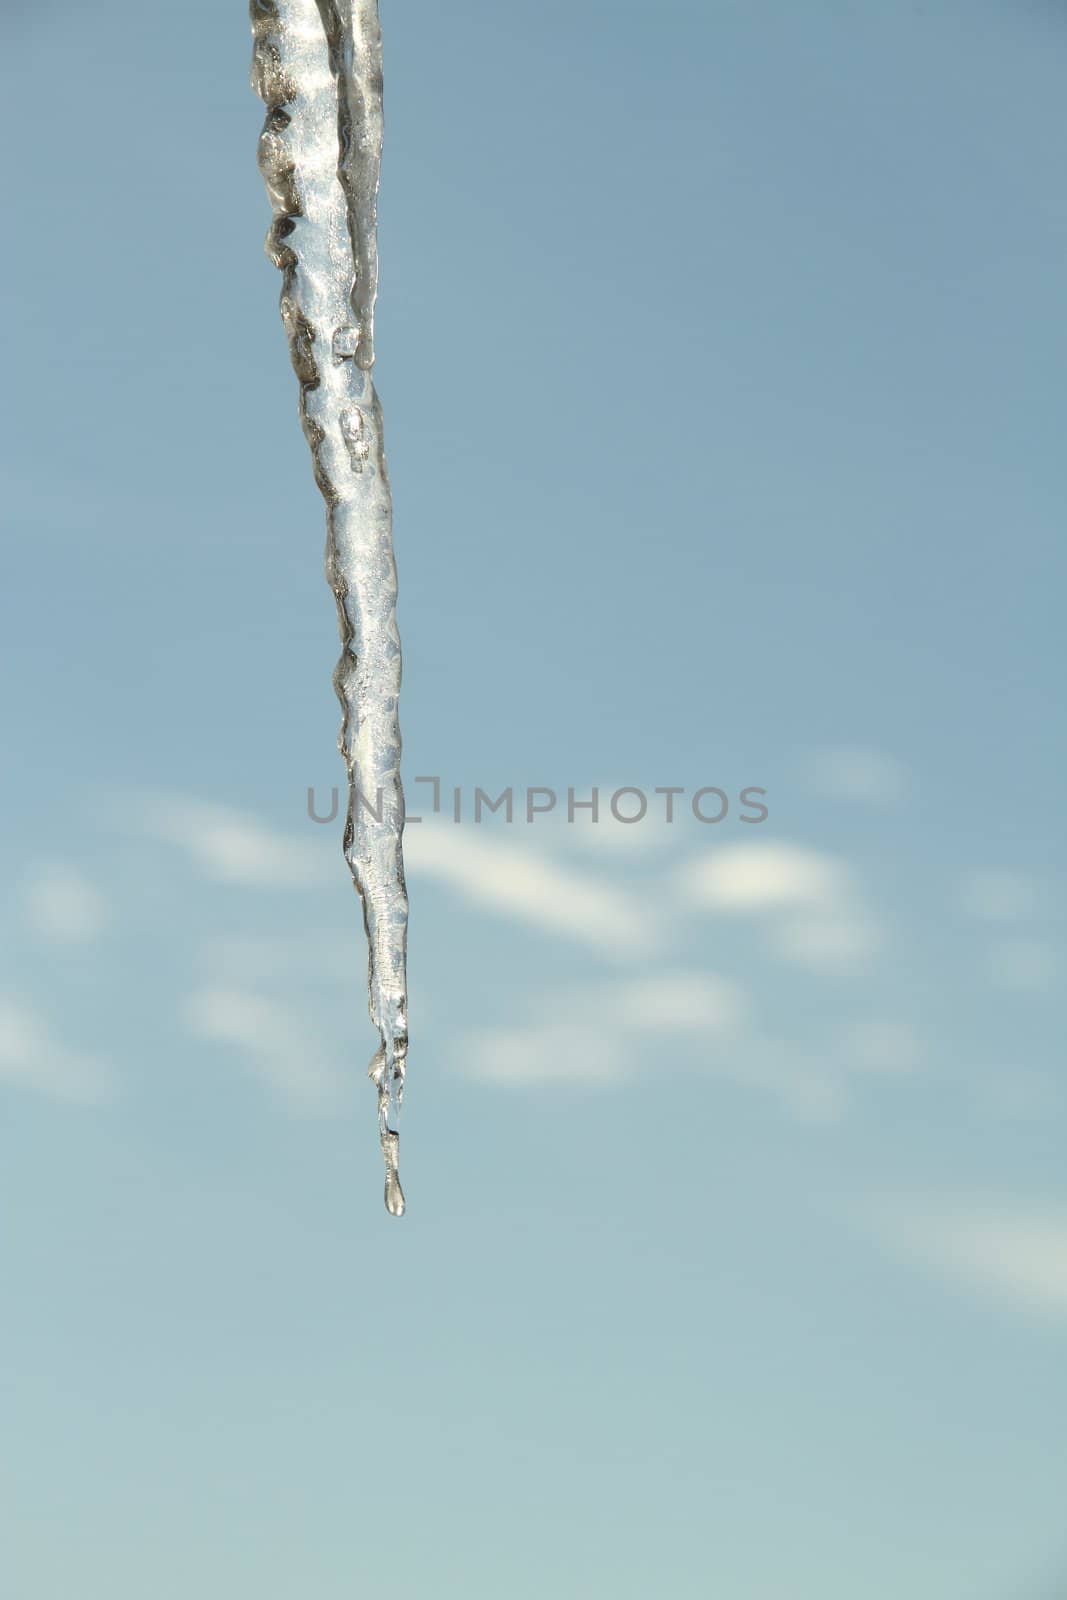 A lone icicle hanging against a blue sky.